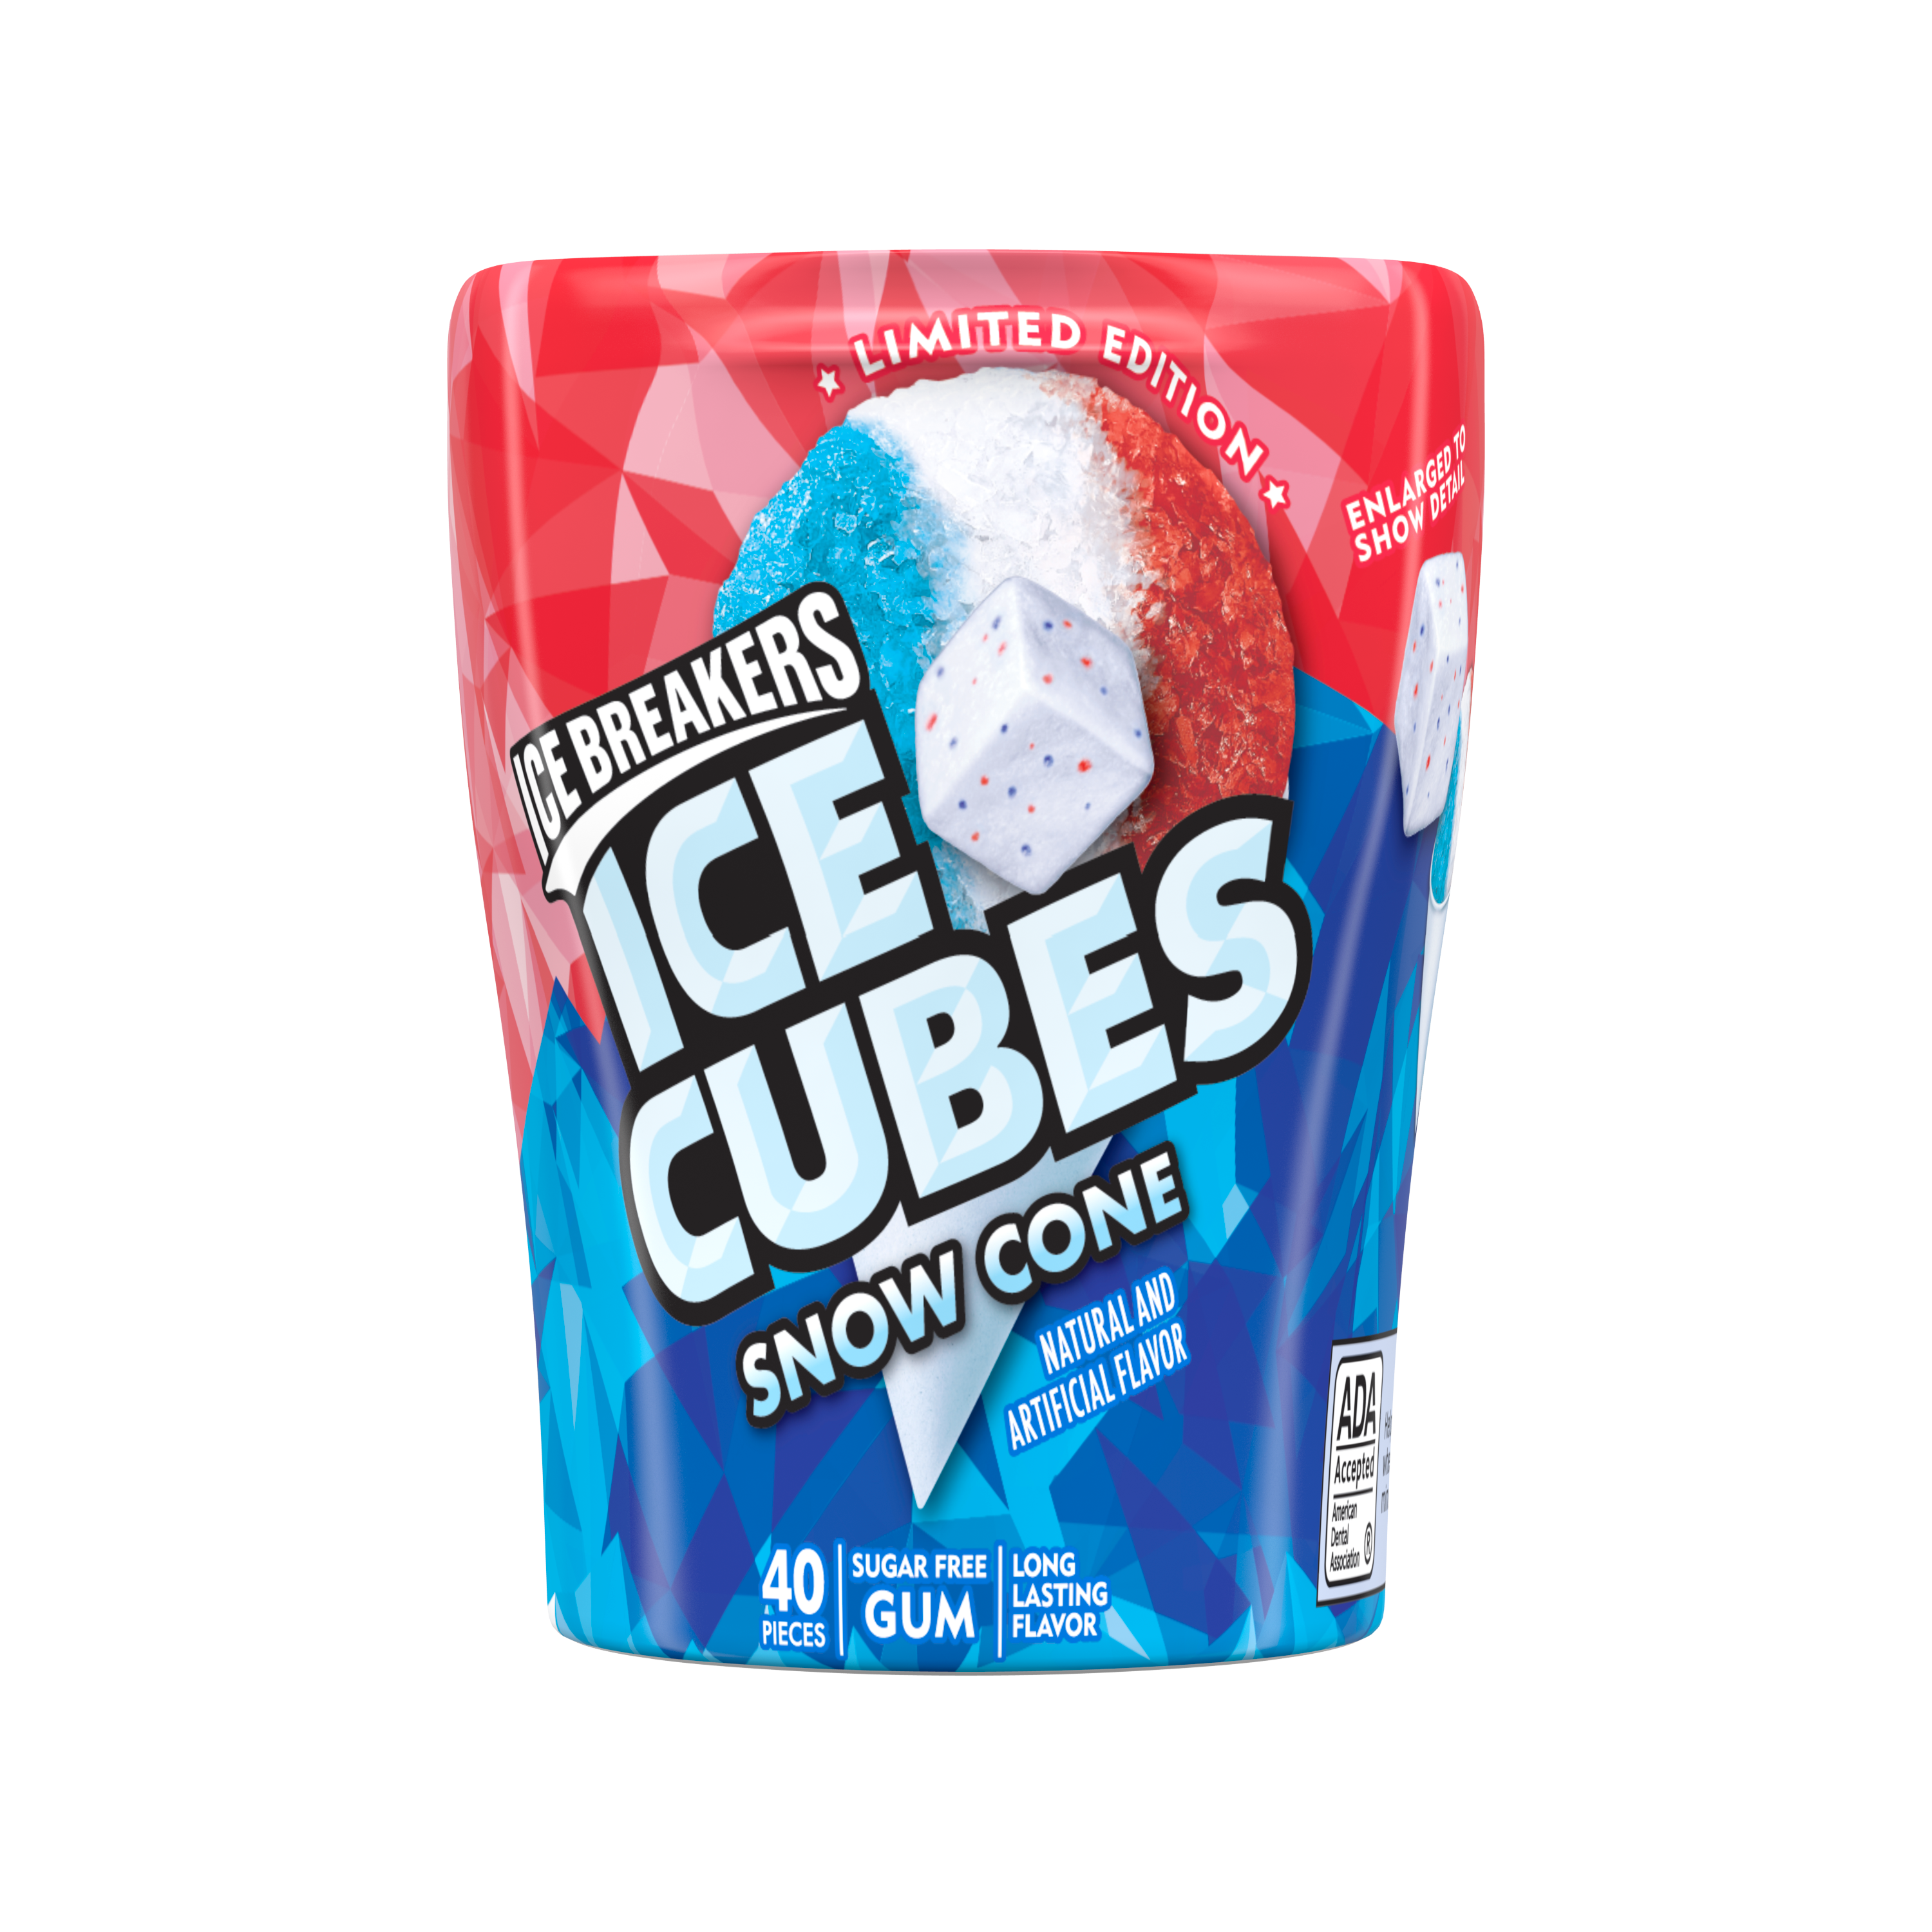 ICE BREAKERS ICE CUBES Snow Cone Sugar Free Gum, 3.24 oz bottle, 40 pieces - Front of Package